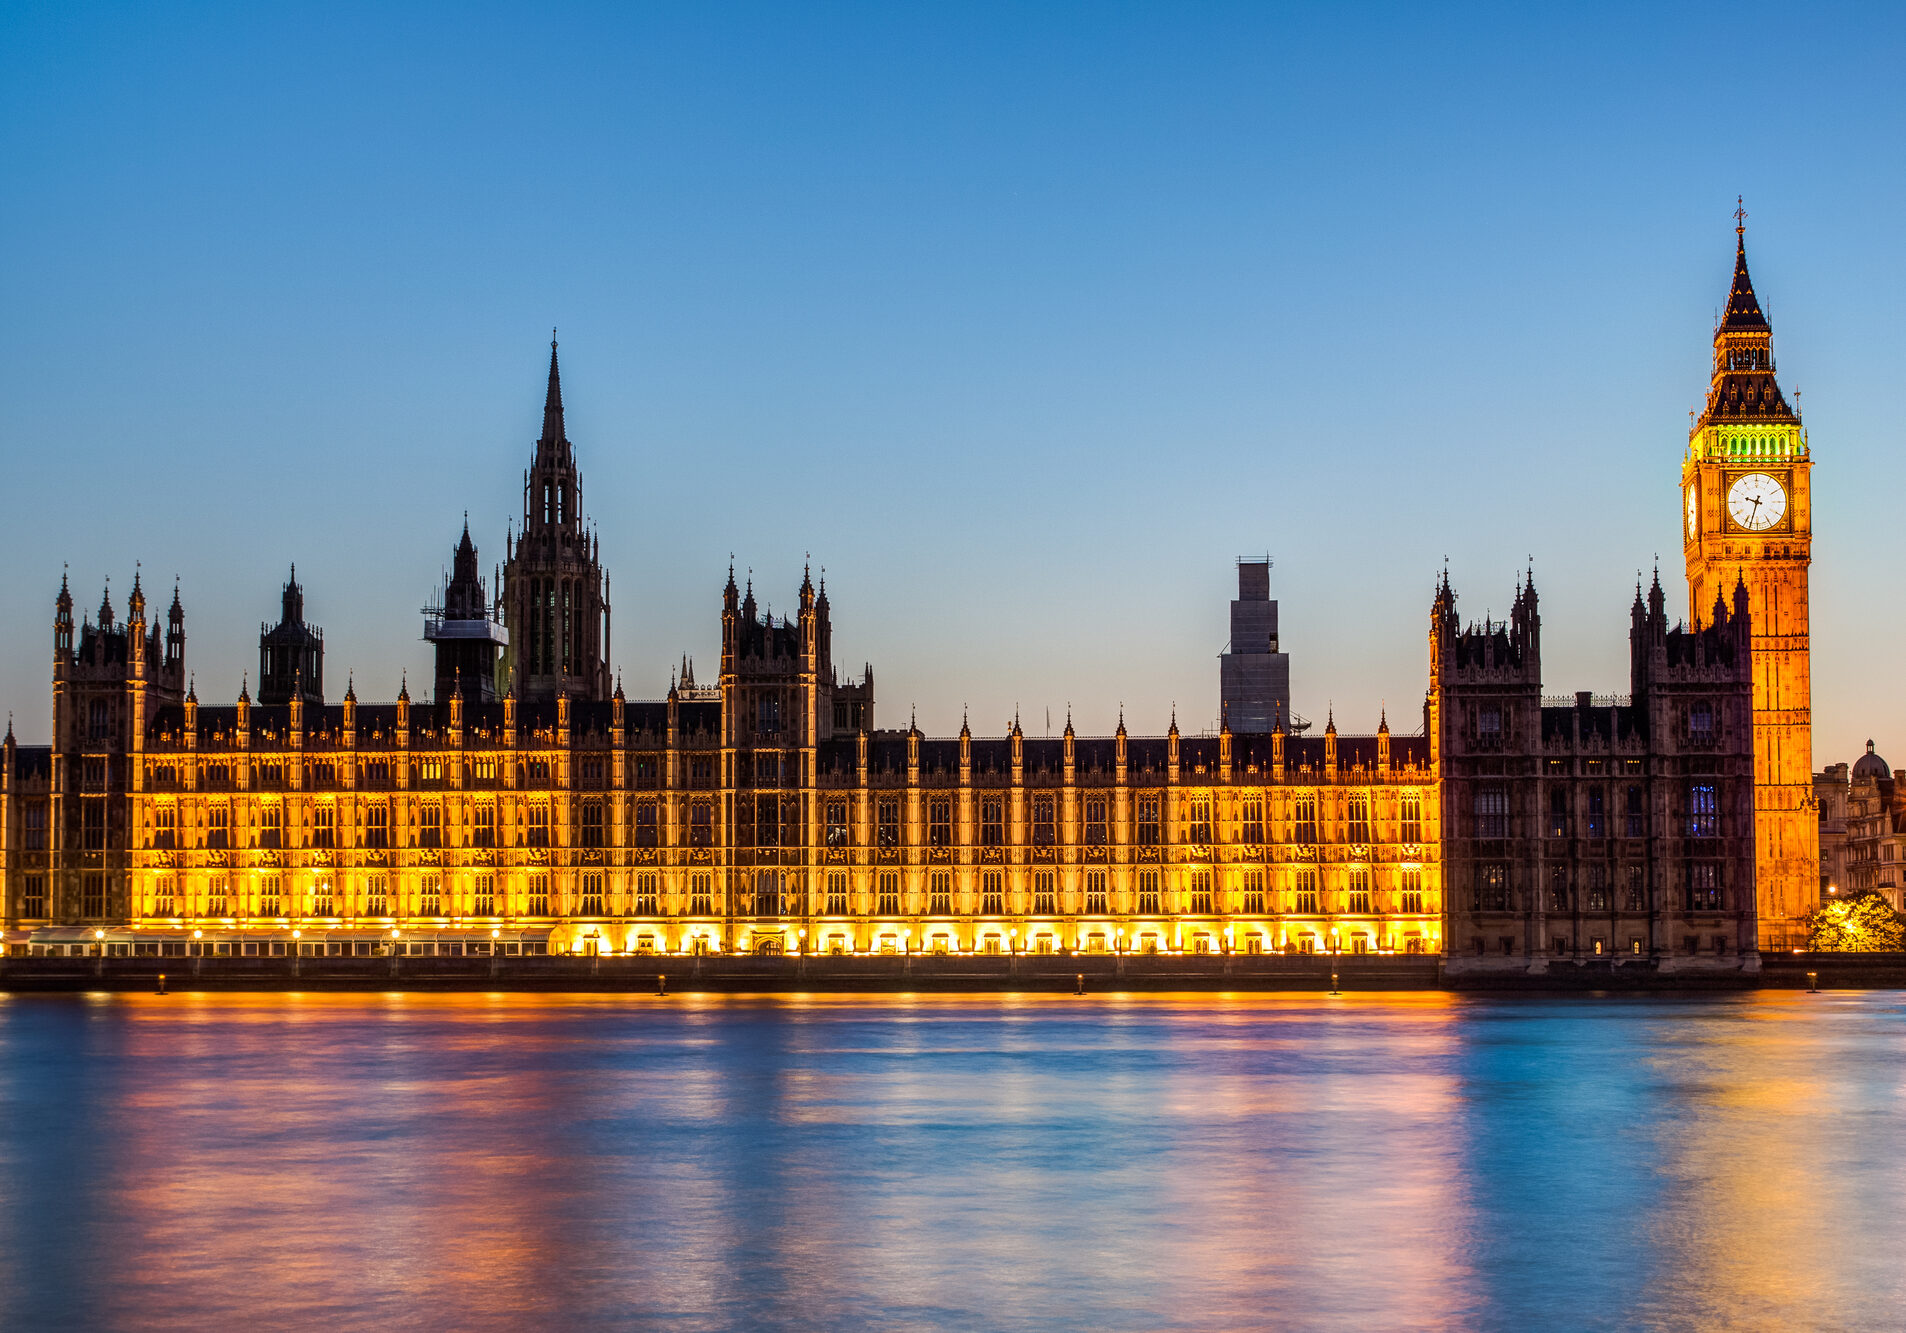 Night time photograph of the House of Lords from the river Thames